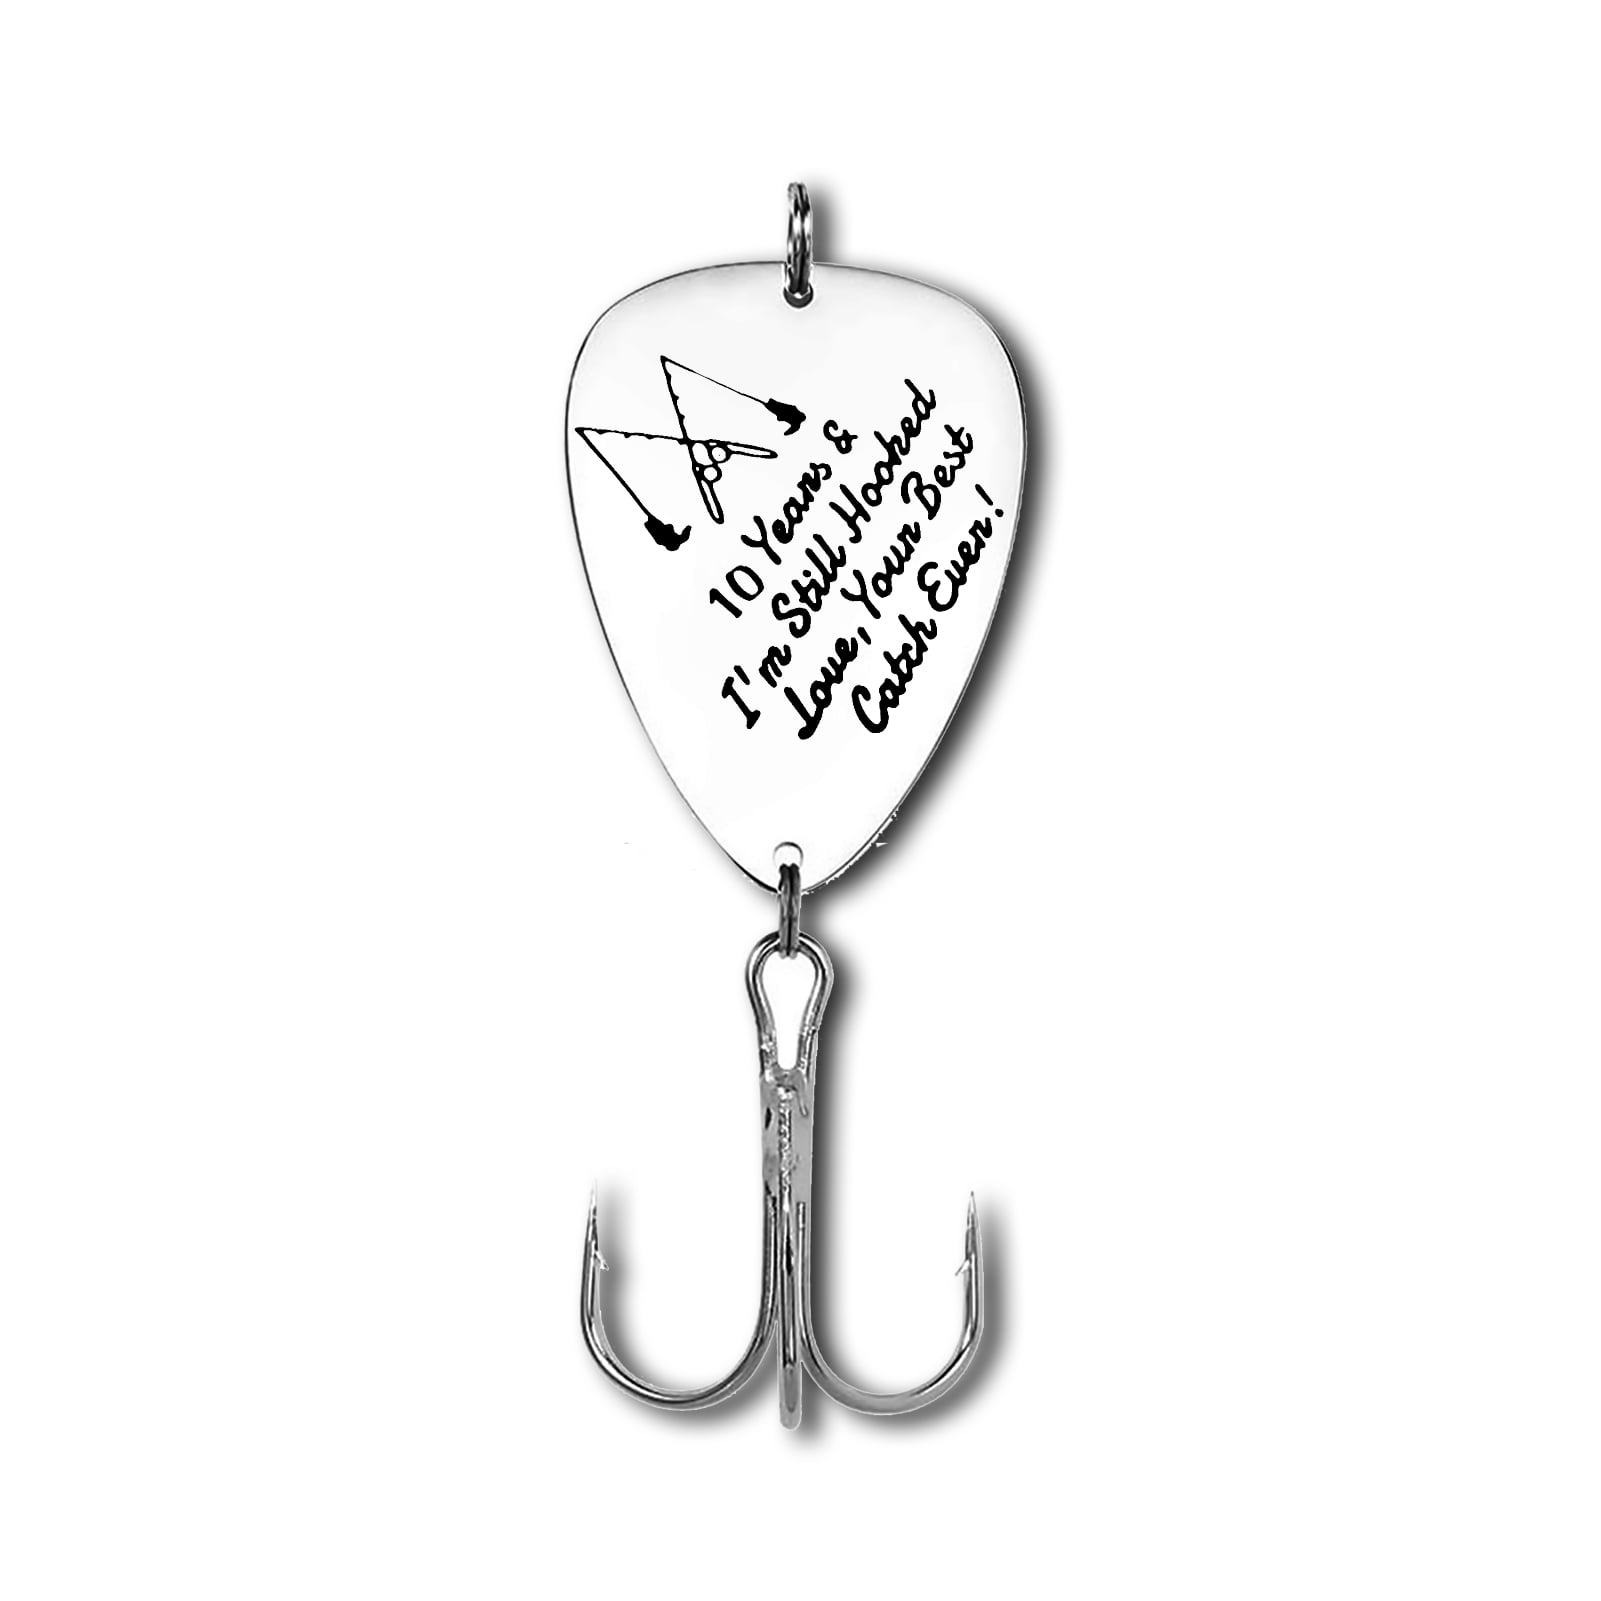 10th Anniversary Gifts For Him Men Fishing Lure Gifts Fisherman Gifts for  Husband Boyfriend 10 Years Anniversary Hook Gifts Wedding Anniversary  Birthday Gifts Valentines Day Gifts Fishing Hooks Gift 